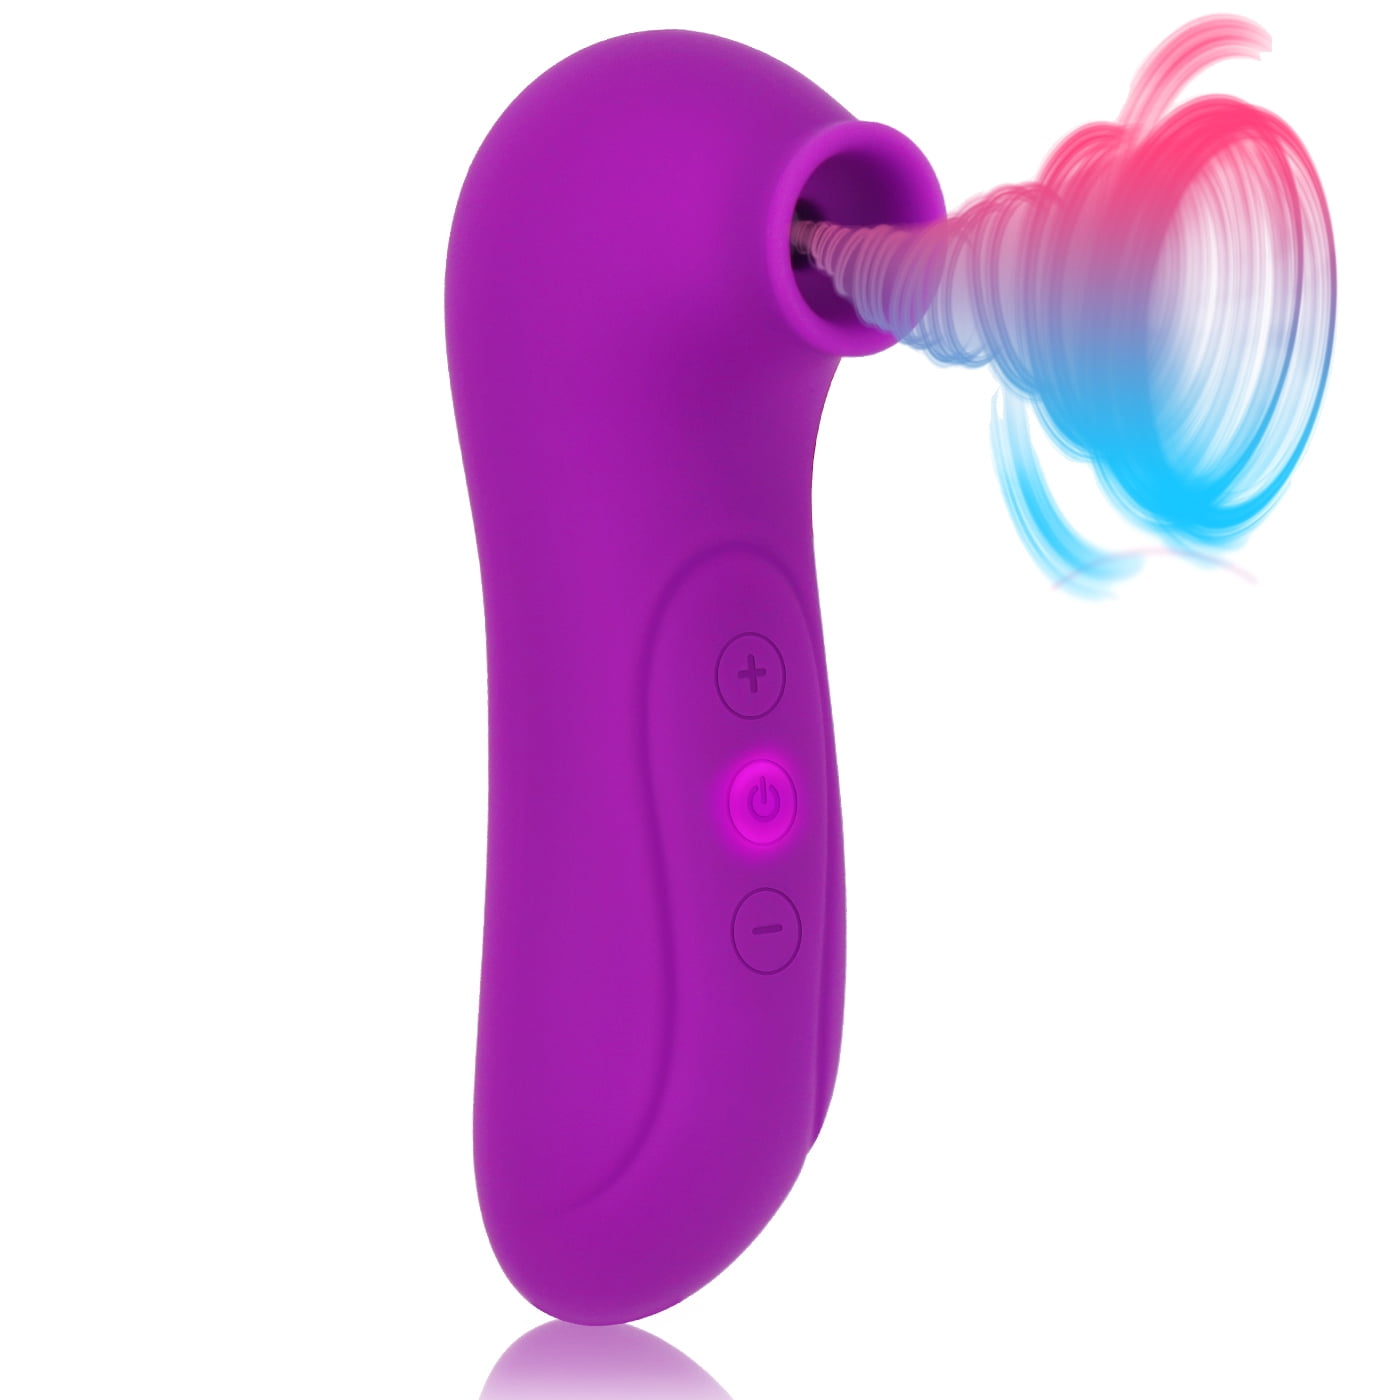 DARZU Vibrator Sex Toys for Women Adult Sex Toys with 10 Intensities Modes Clit Stimulator Massager for Woman Pleasure - Purple